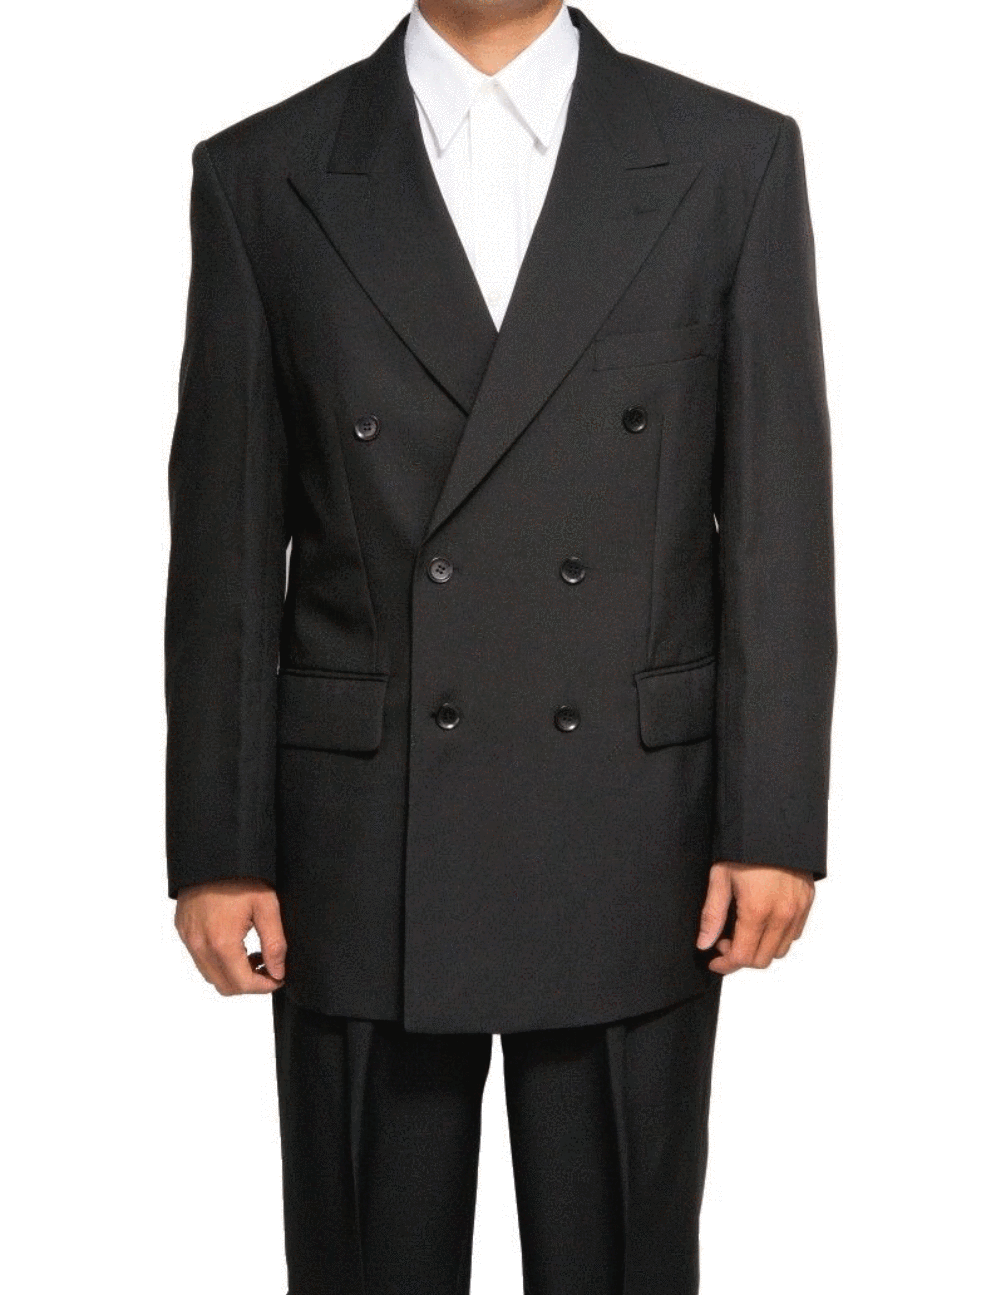 Atlantis Collection - Black Regular Fit Double Breasted 2 Piece Suit